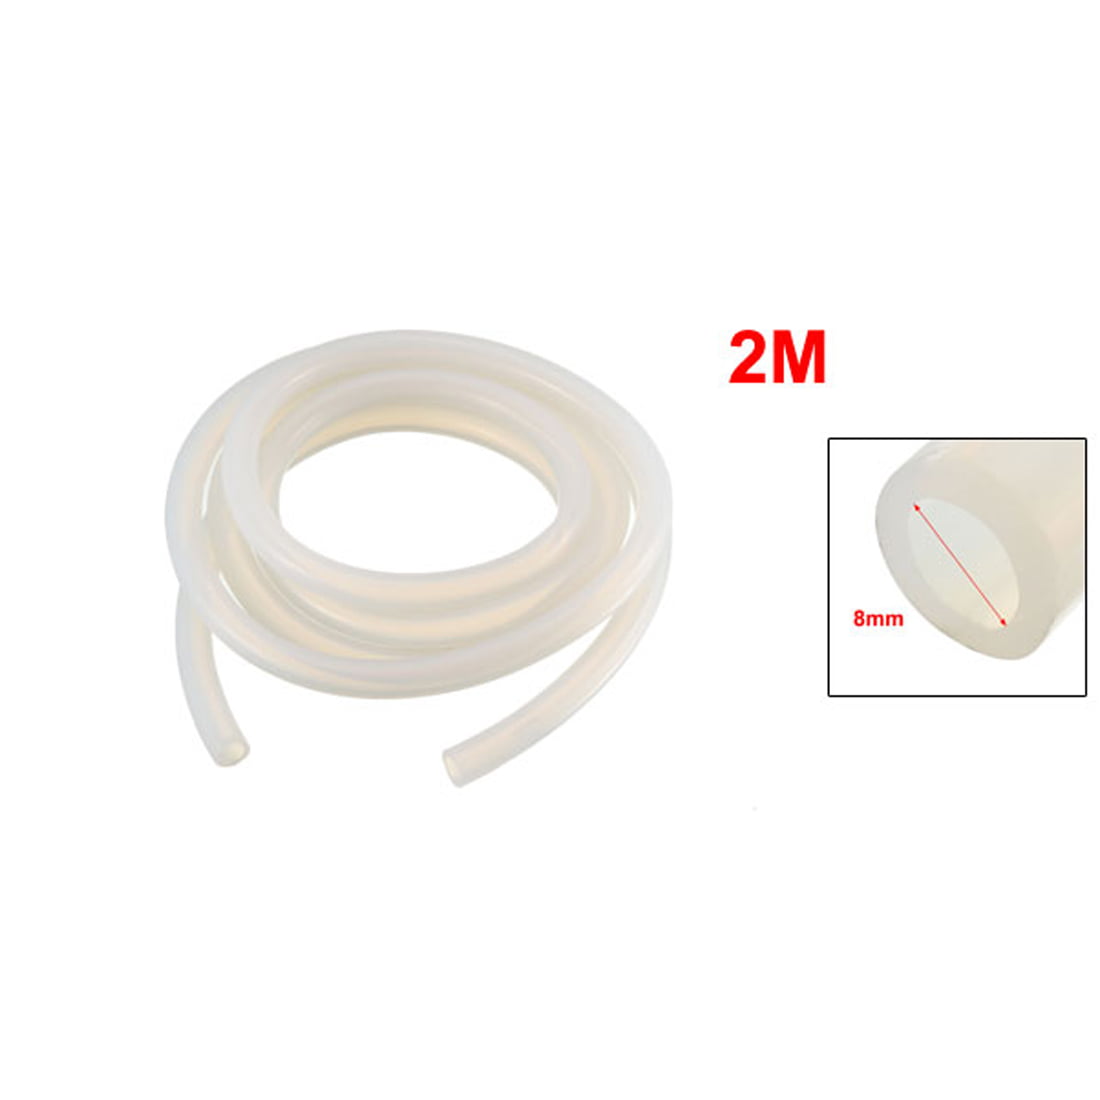 8mm x 12mm Diameter High Temp Resistant Silicone Tube Hose Pipe 2M Length 